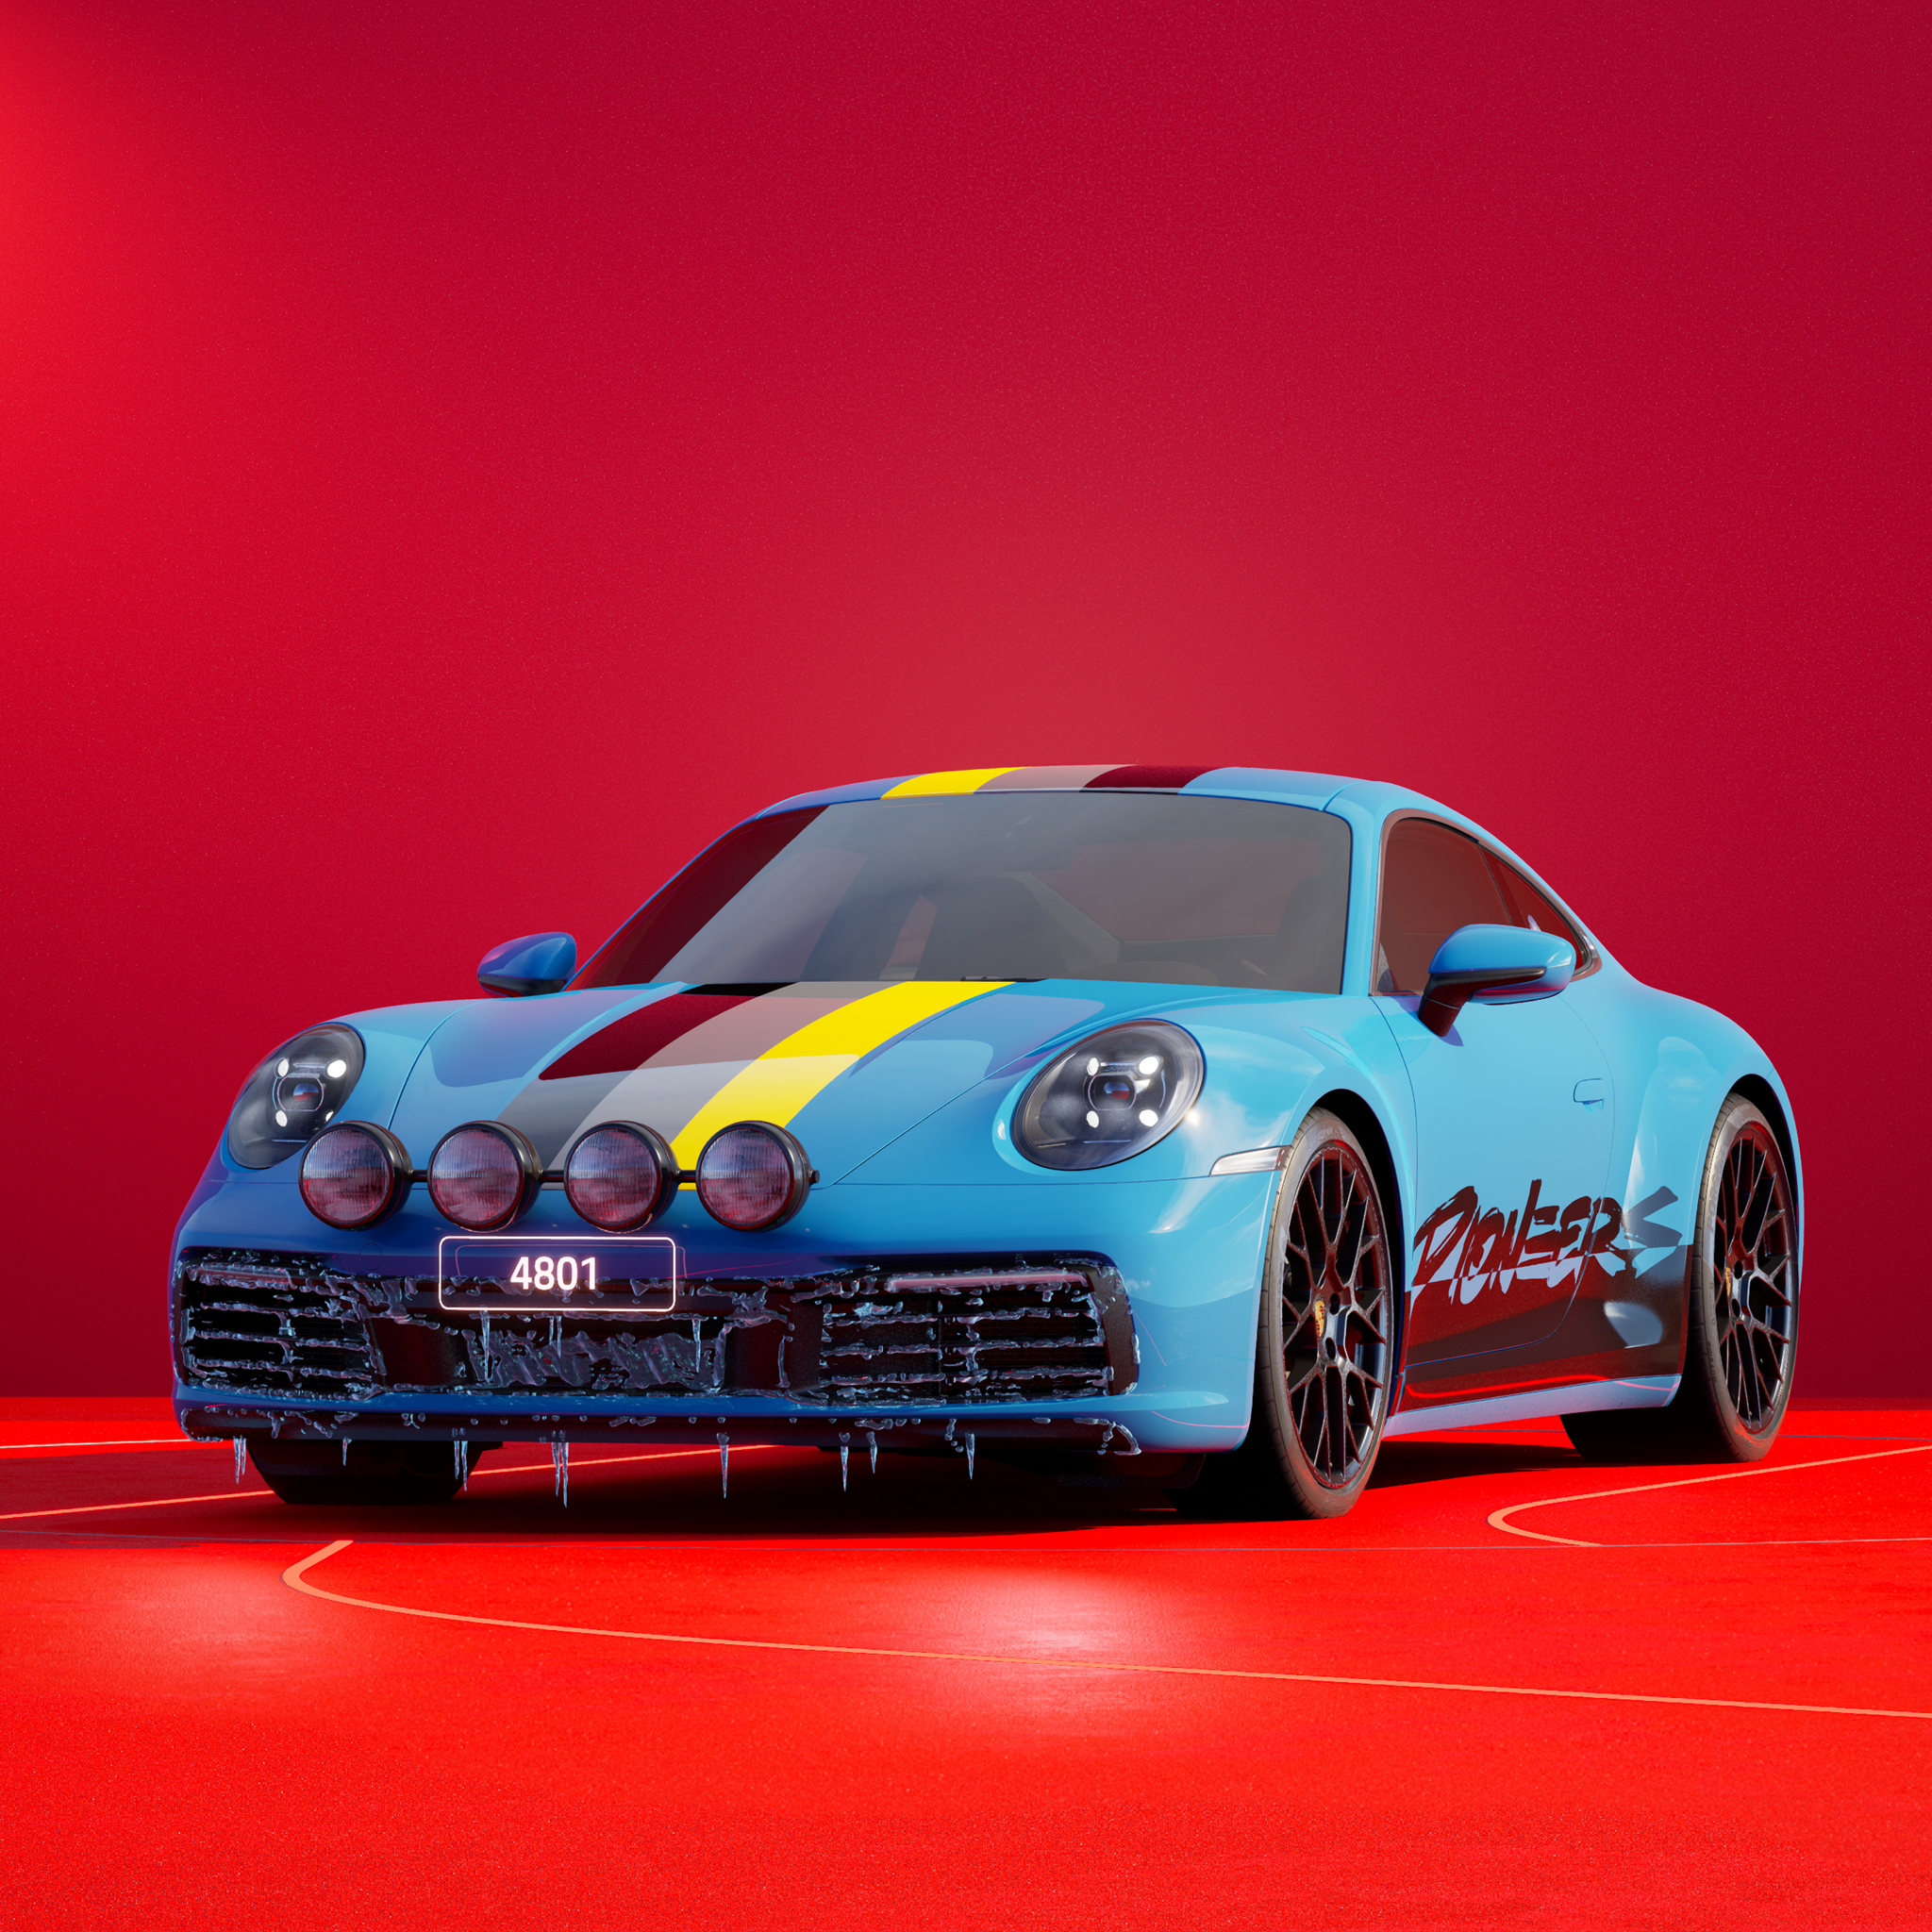 The PORSCHΞ 911 4801 image in phase